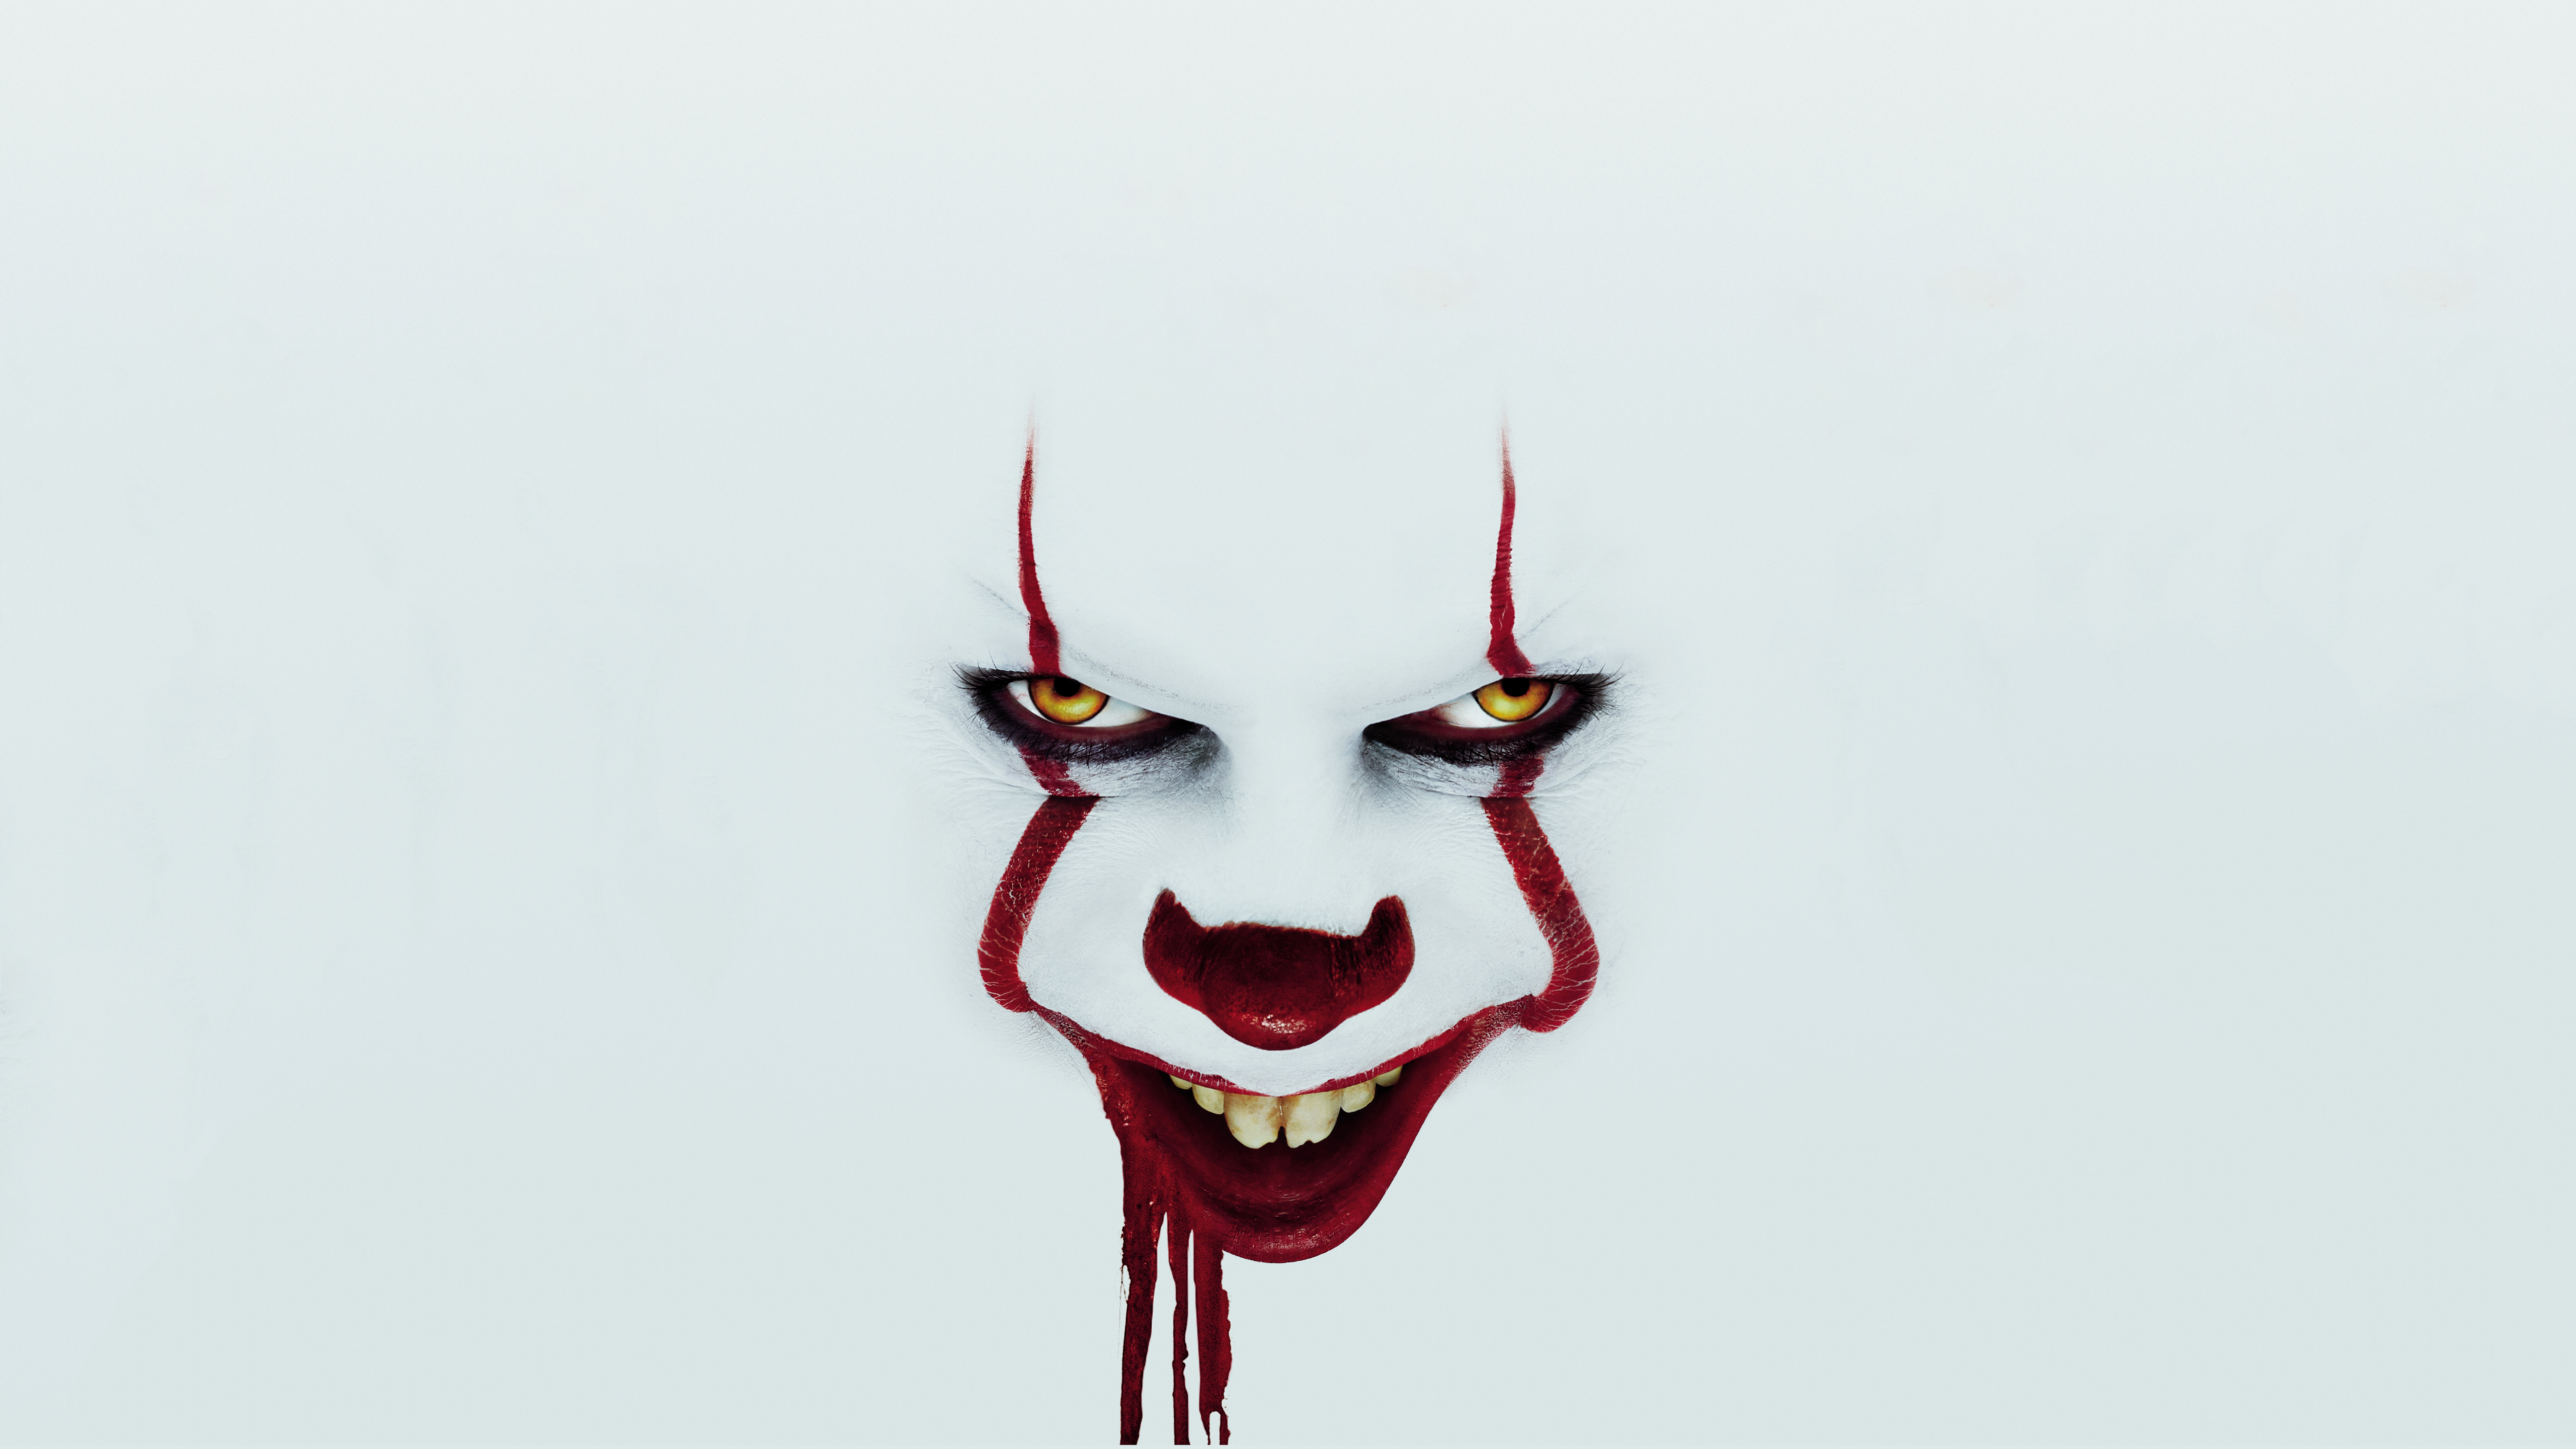 Popular It Chapter Two Image for Phone